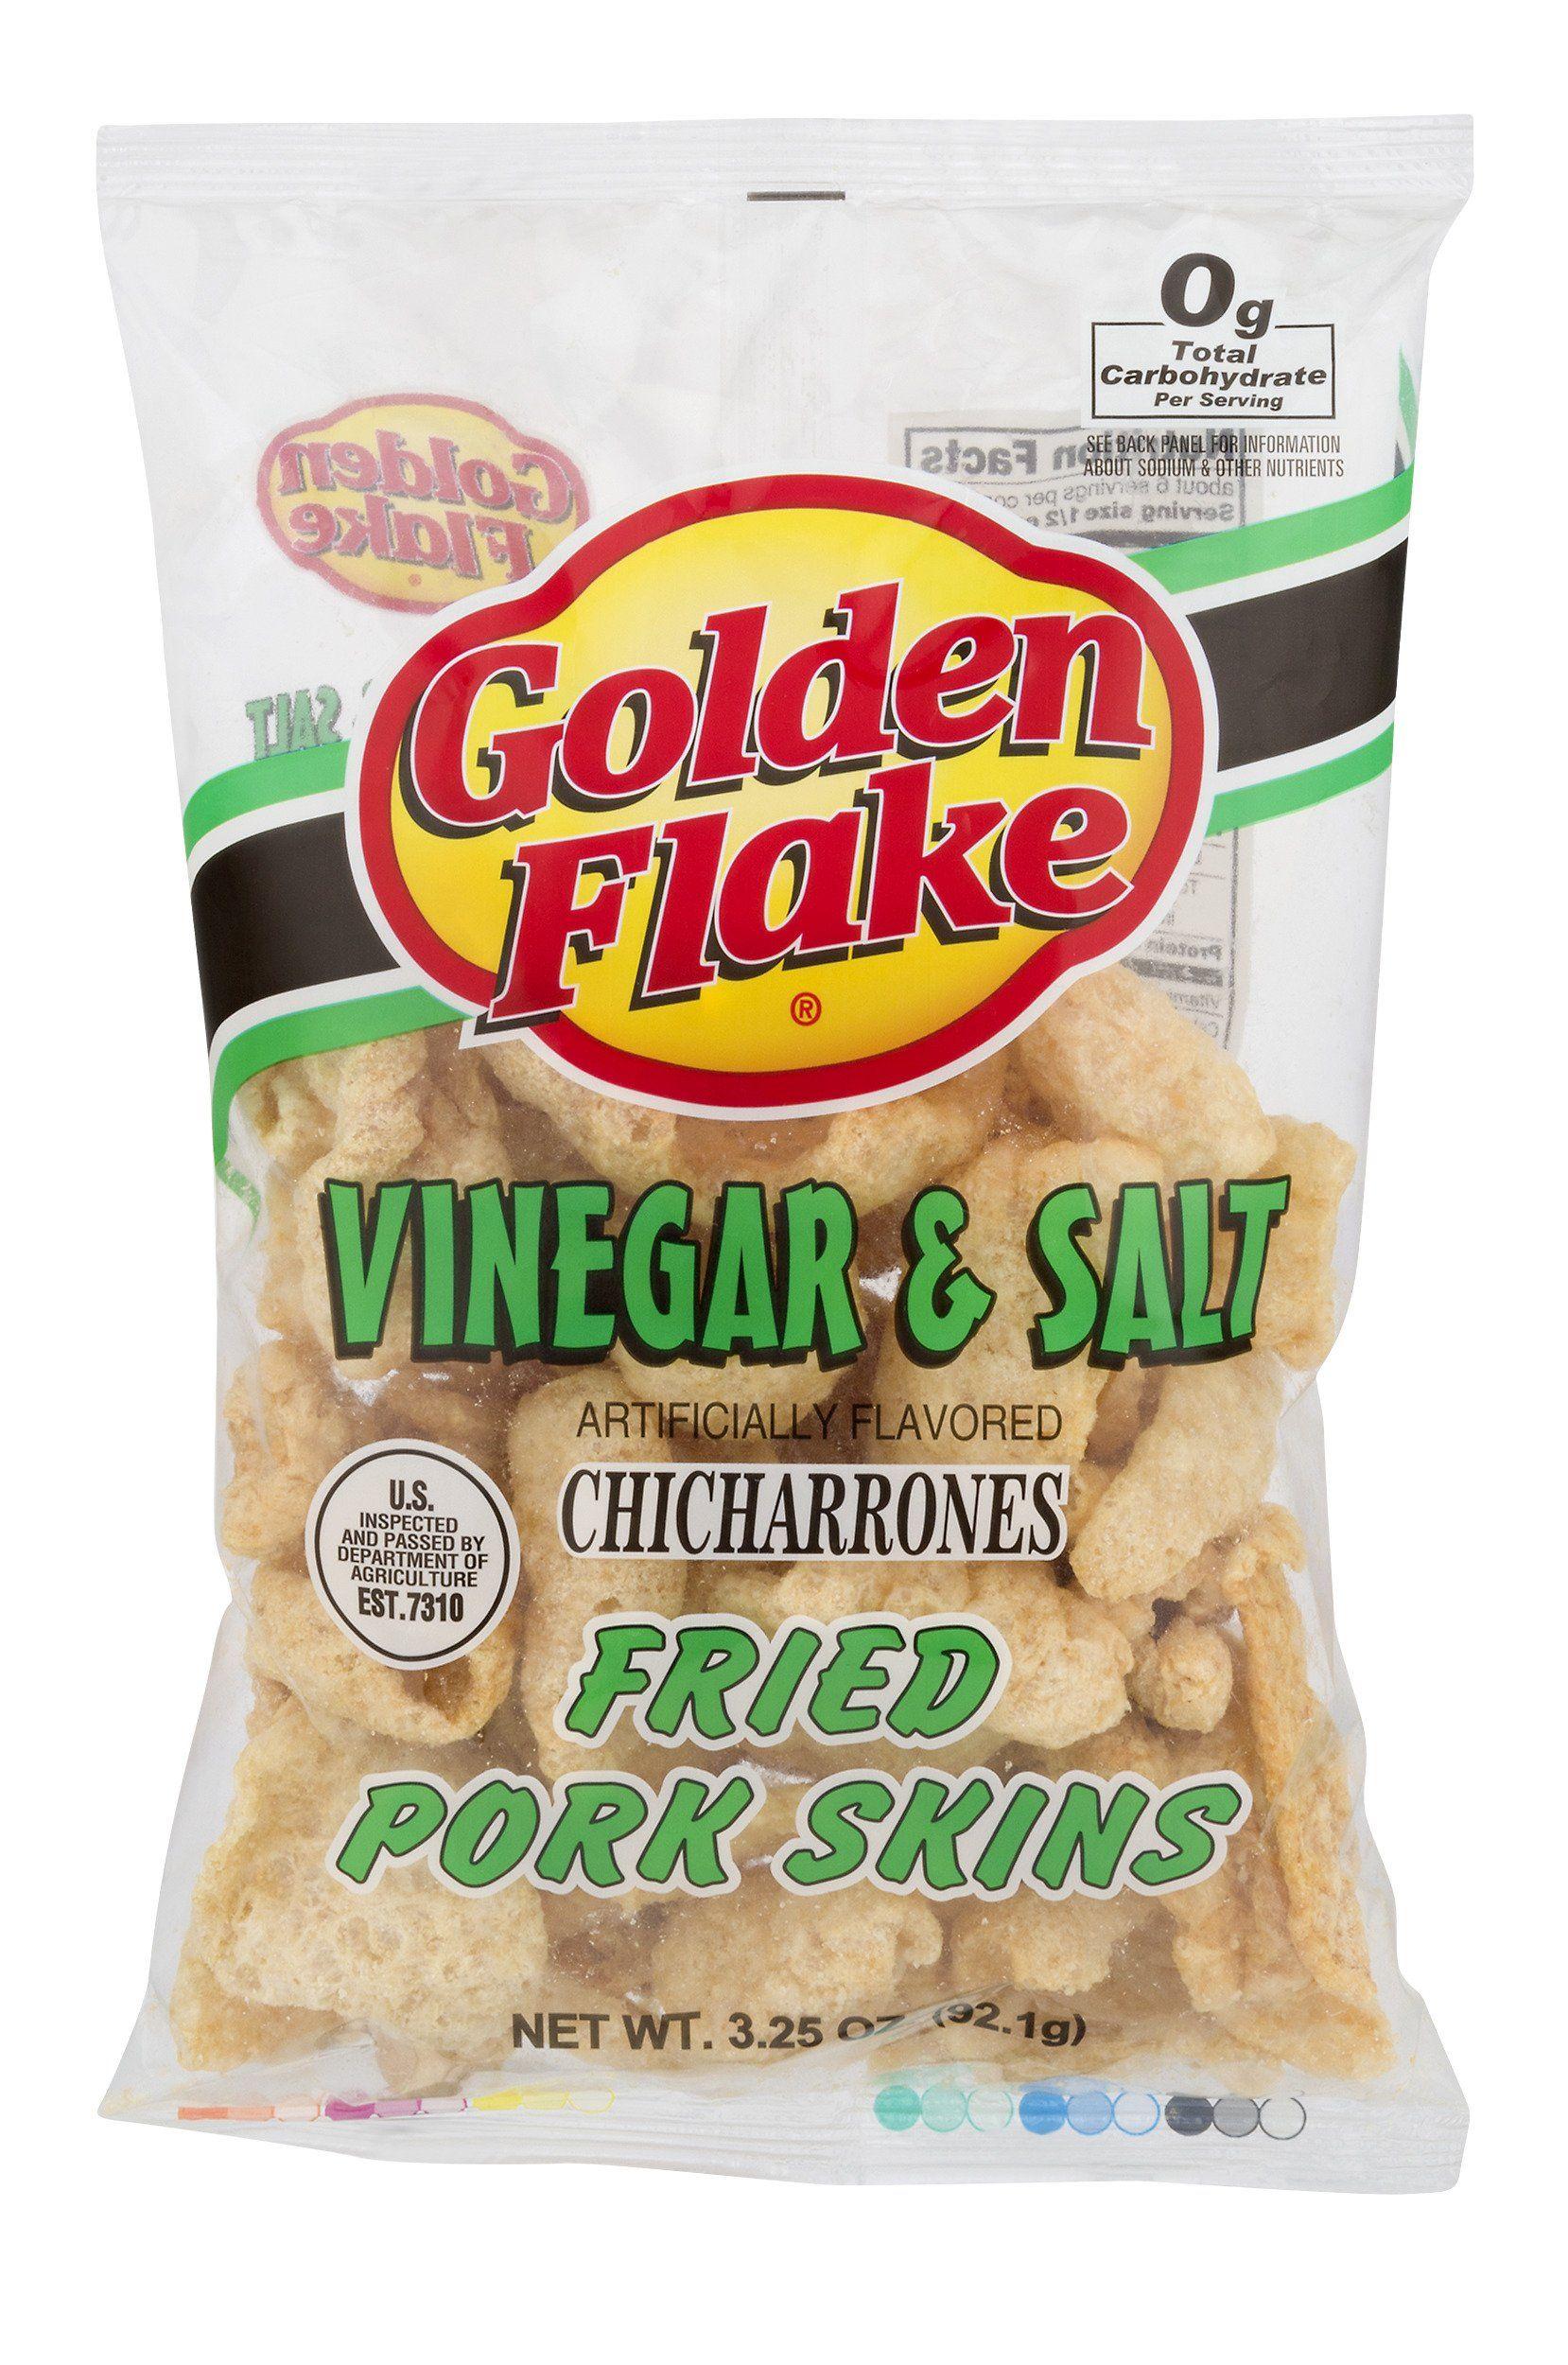 Golden Flake Logo - Golden Flake Products | Utz Quality Foods - Buy Cheese Curls, Pork ...